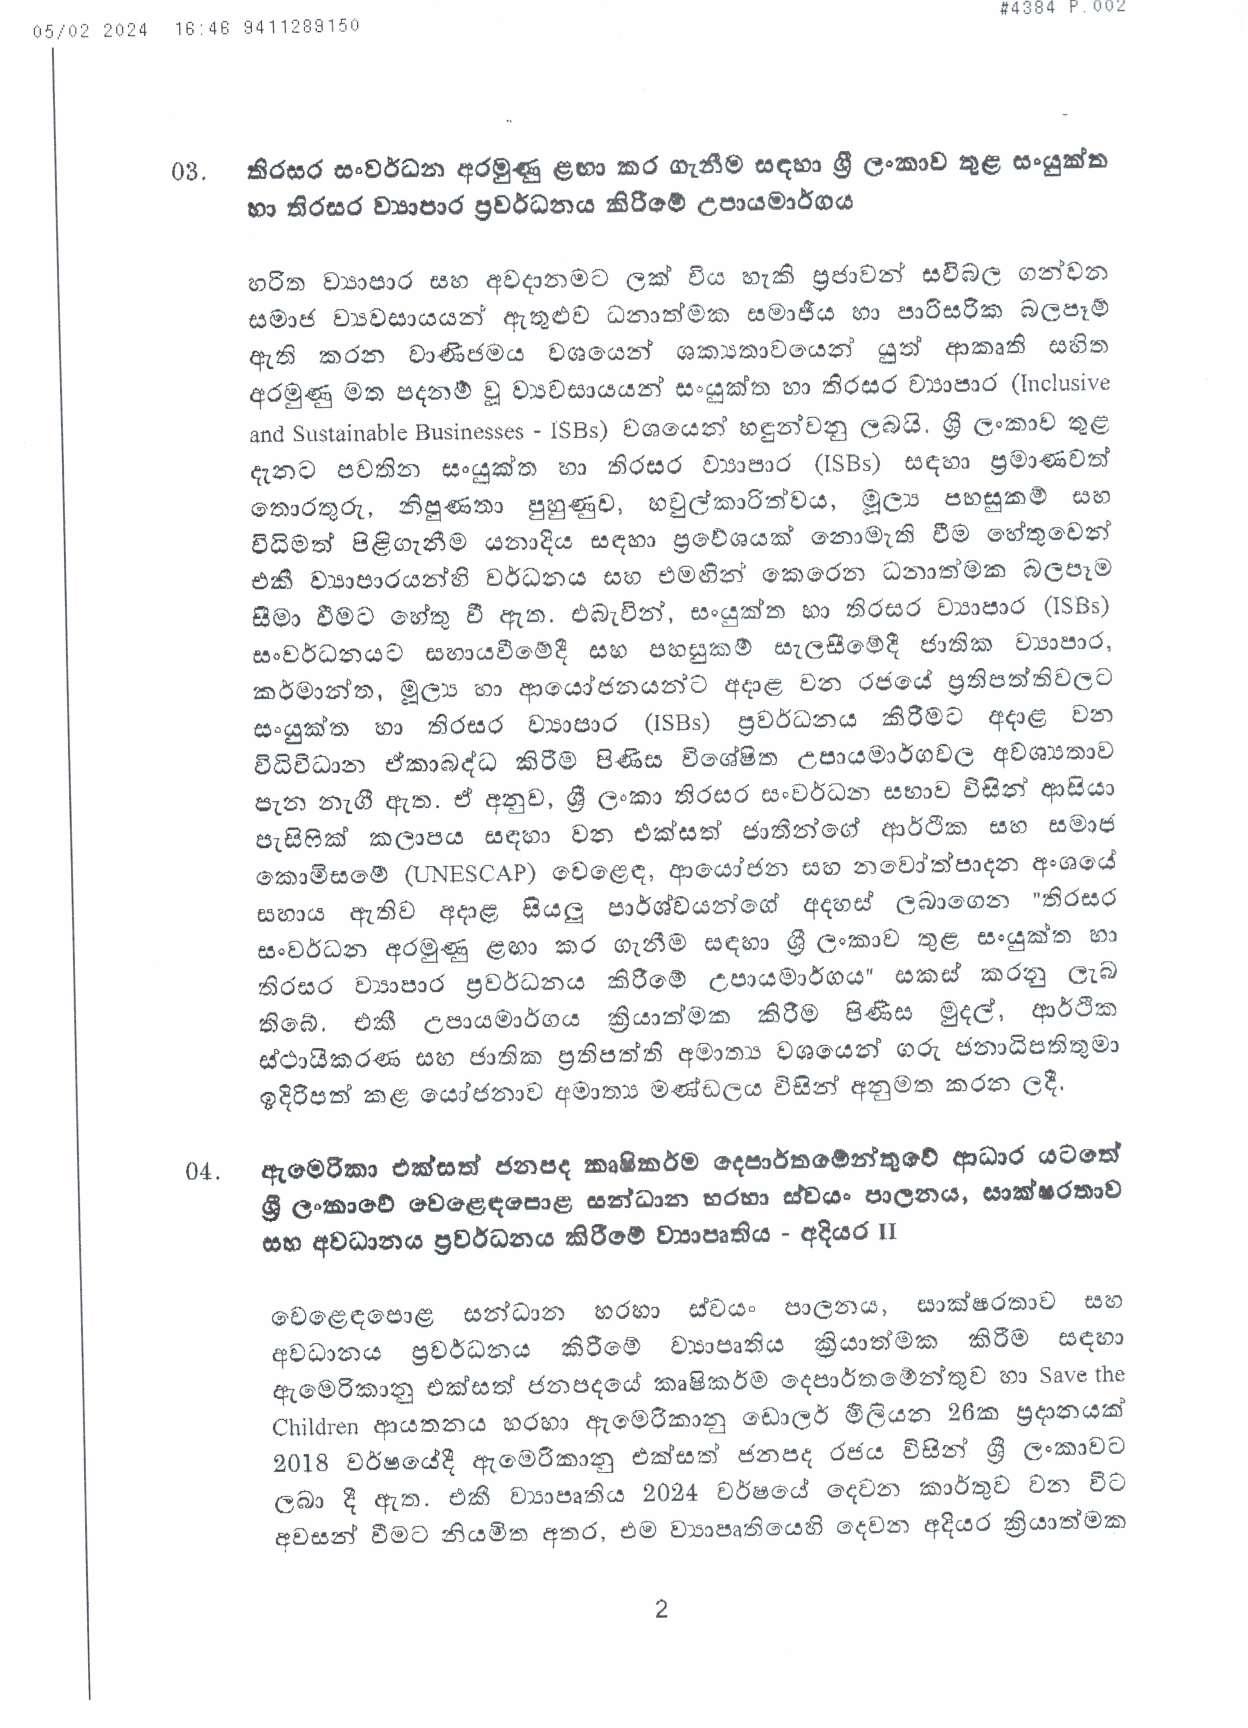 Cabinet Decision on 05.02.2024 page 002